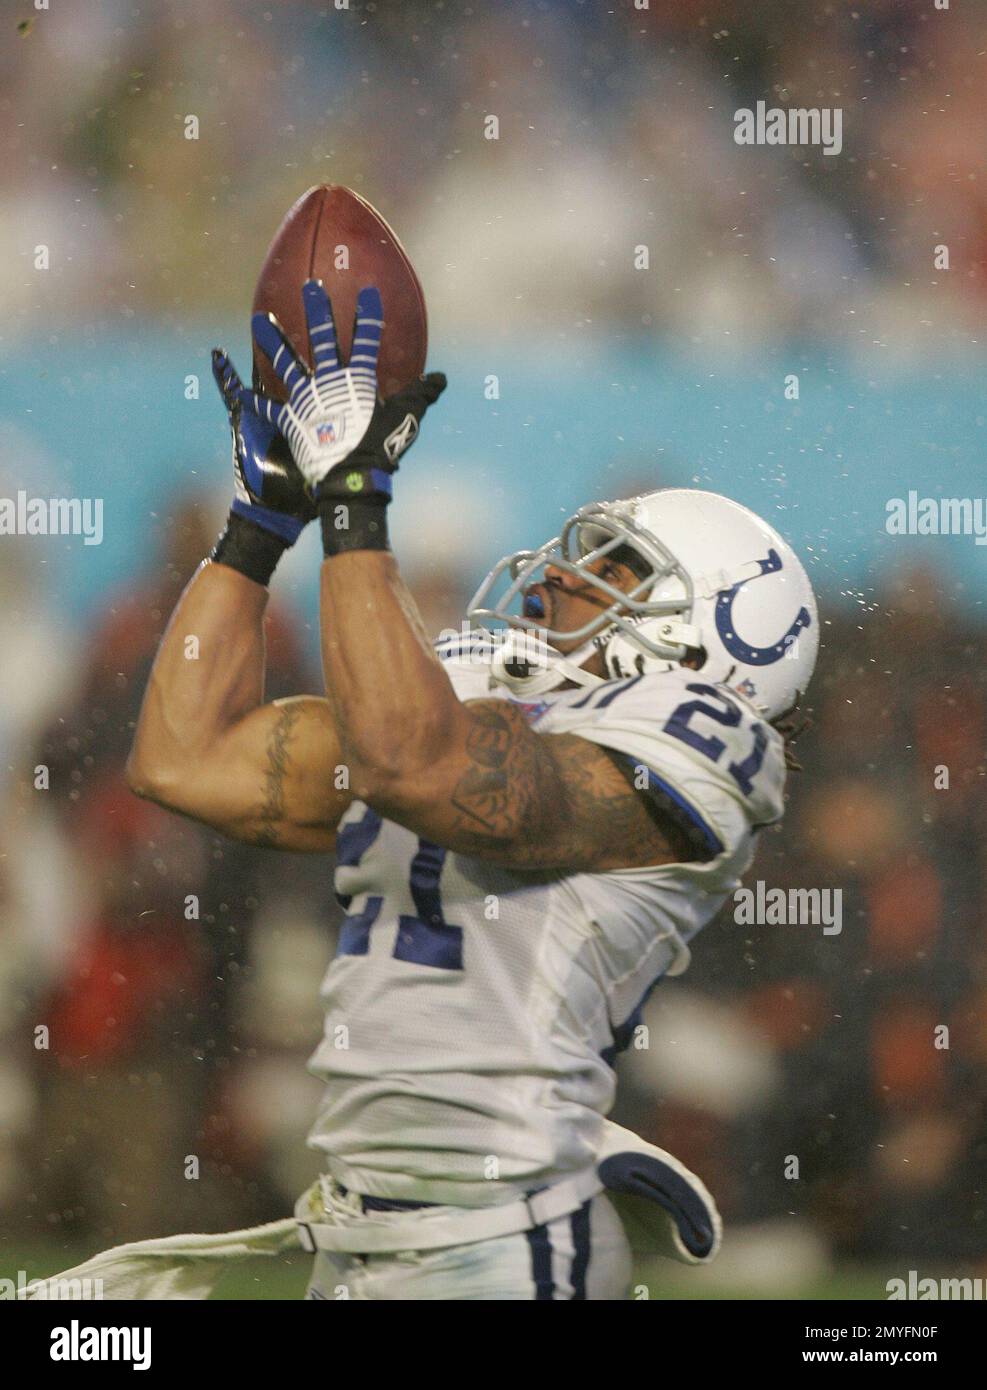 Indianapolis Colts safety Bob Sanders catches a ball during Super Bowl XLI  at Dolphin Stadium in Miami, Sunday, Feb. 4, 2007. (AP Photo/Michael Conroy  Stock Photo - Alamy